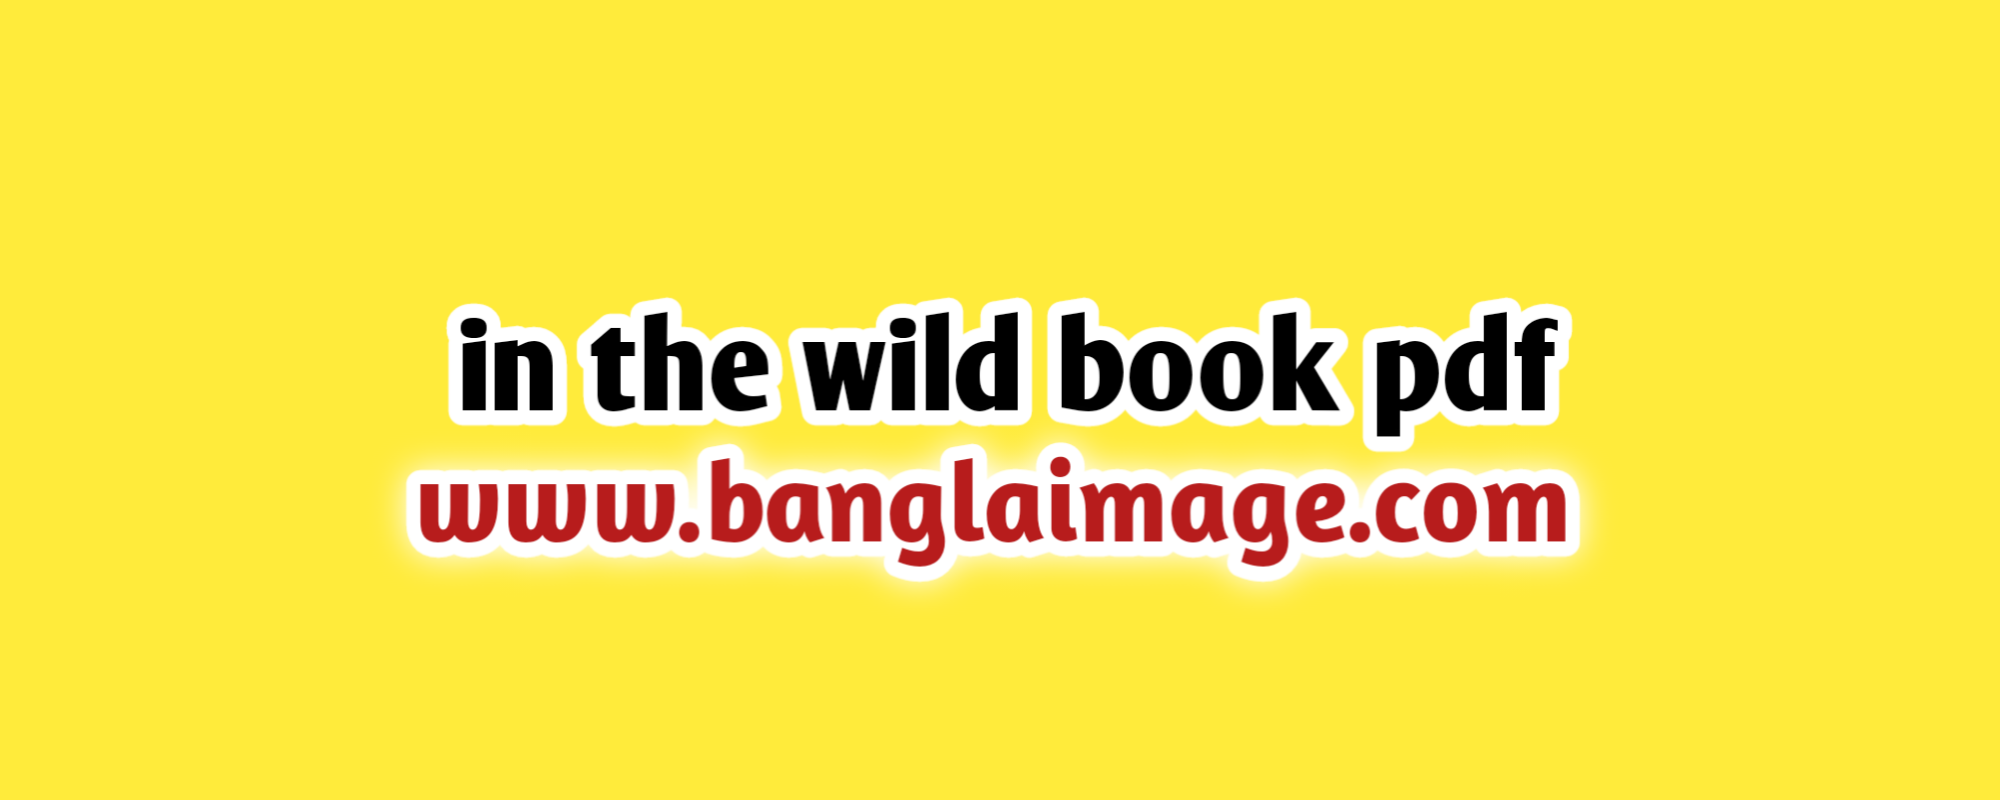 in the wild book pdf, into the wild chapter 1 pdf, into the wild book with page numbers, the into the wild chapter 1 pdf